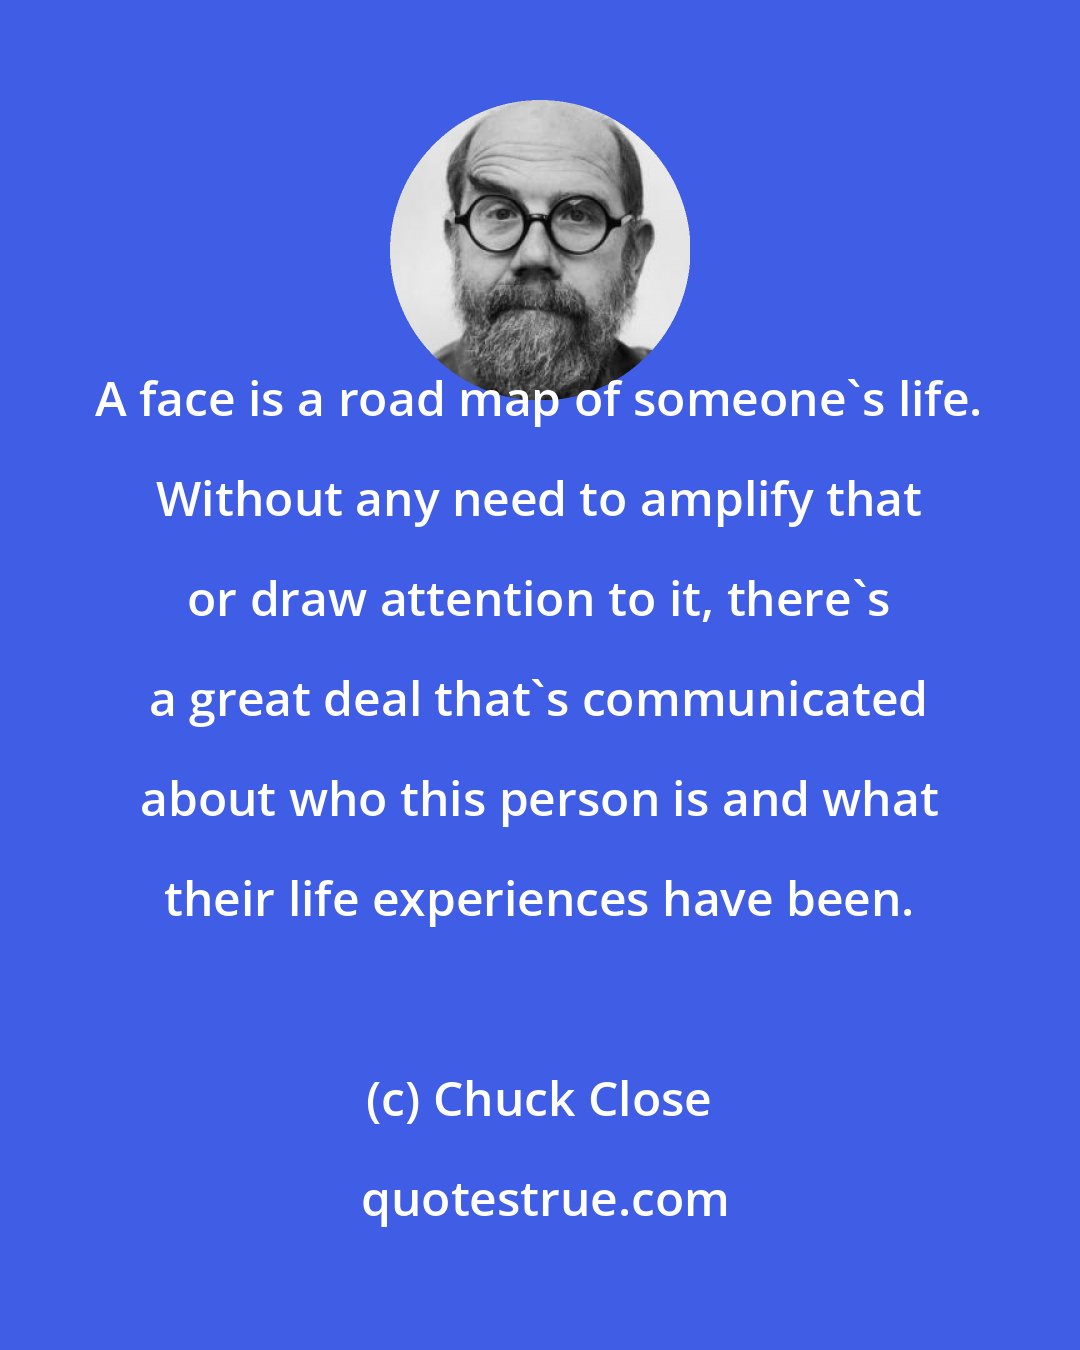 Chuck Close: A face is a road map of someone's life. Without any need to amplify that or draw attention to it, there's a great deal that's communicated about who this person is and what their life experiences have been.